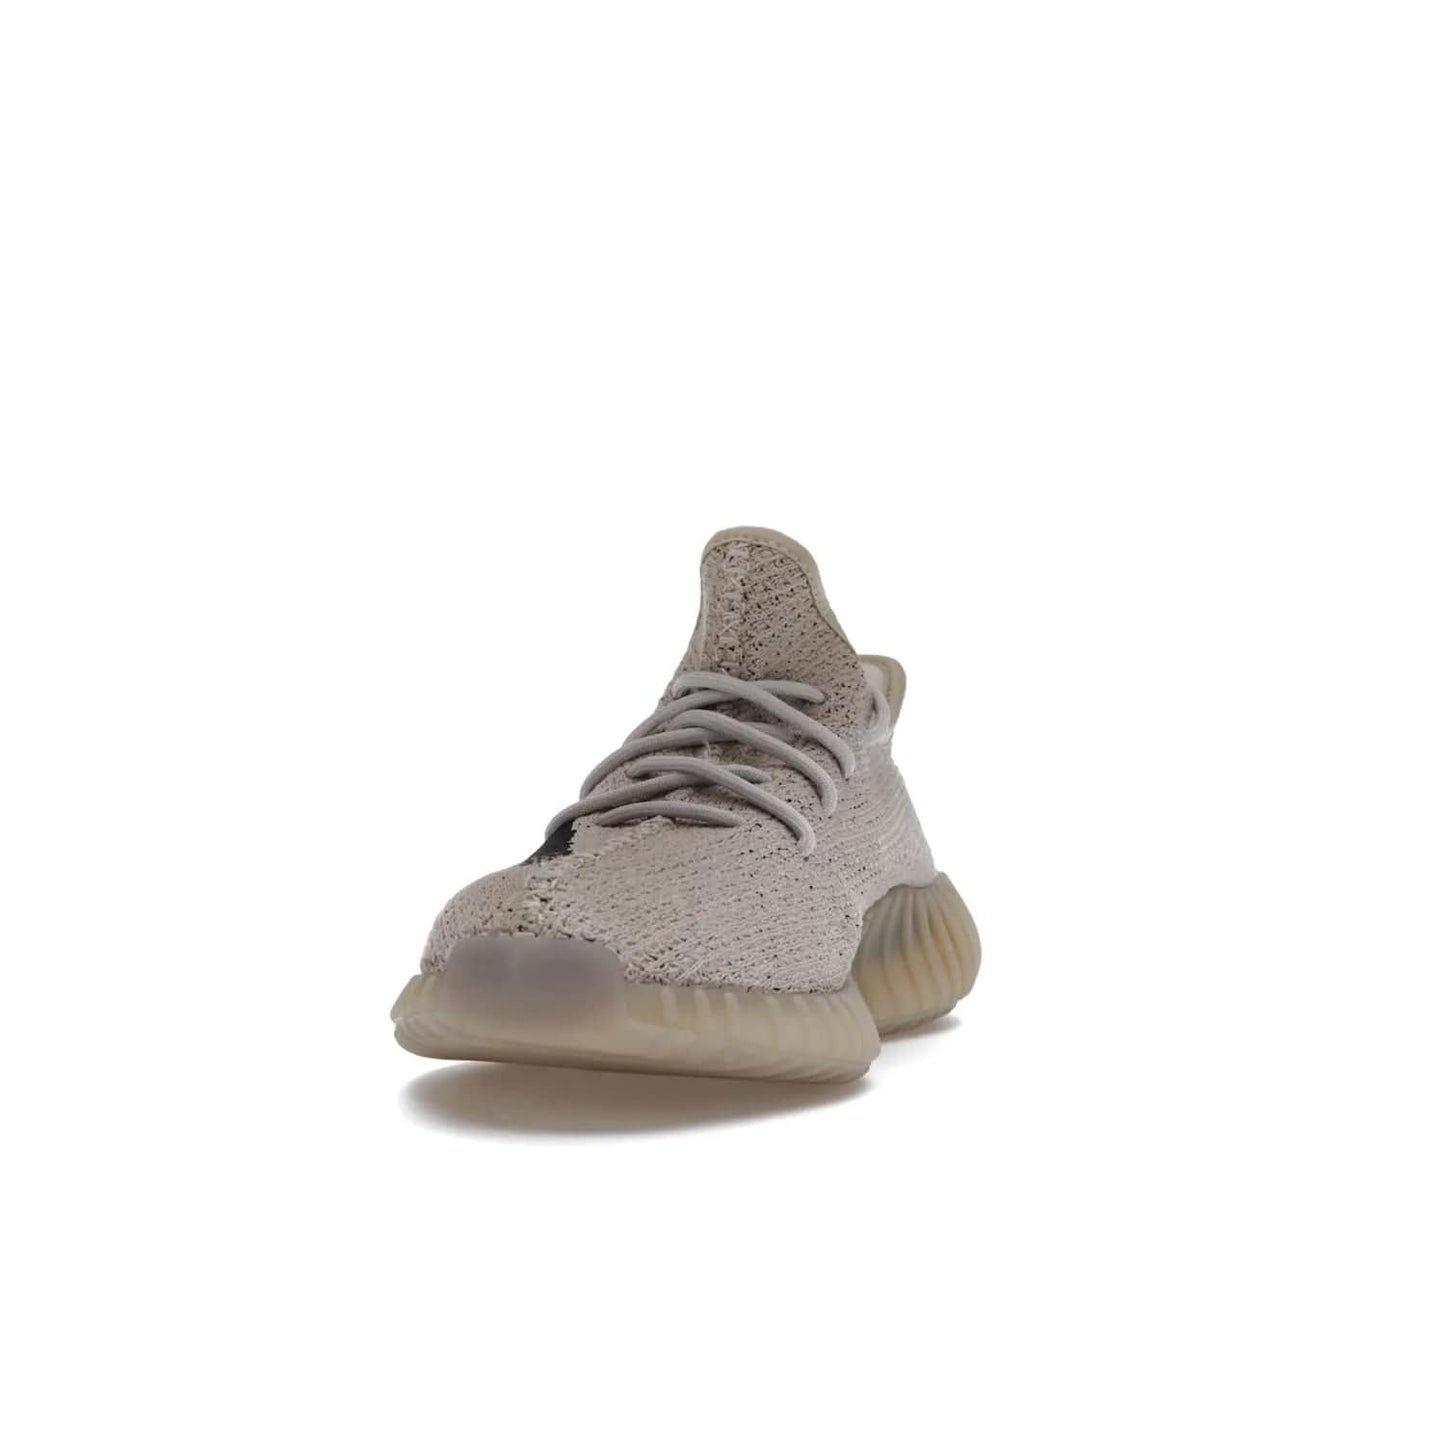 adidas Yeezy Boost 350 V2 Slate - Image 12 - Only at www.BallersClubKickz.com - Adidas Yeezy Boost 350 V2 Slate Core Black Slate featuring Primeknit upper, Boost midsole and semi-translucent TPU cage. Launched on 3/9/2022, retailed at $230.